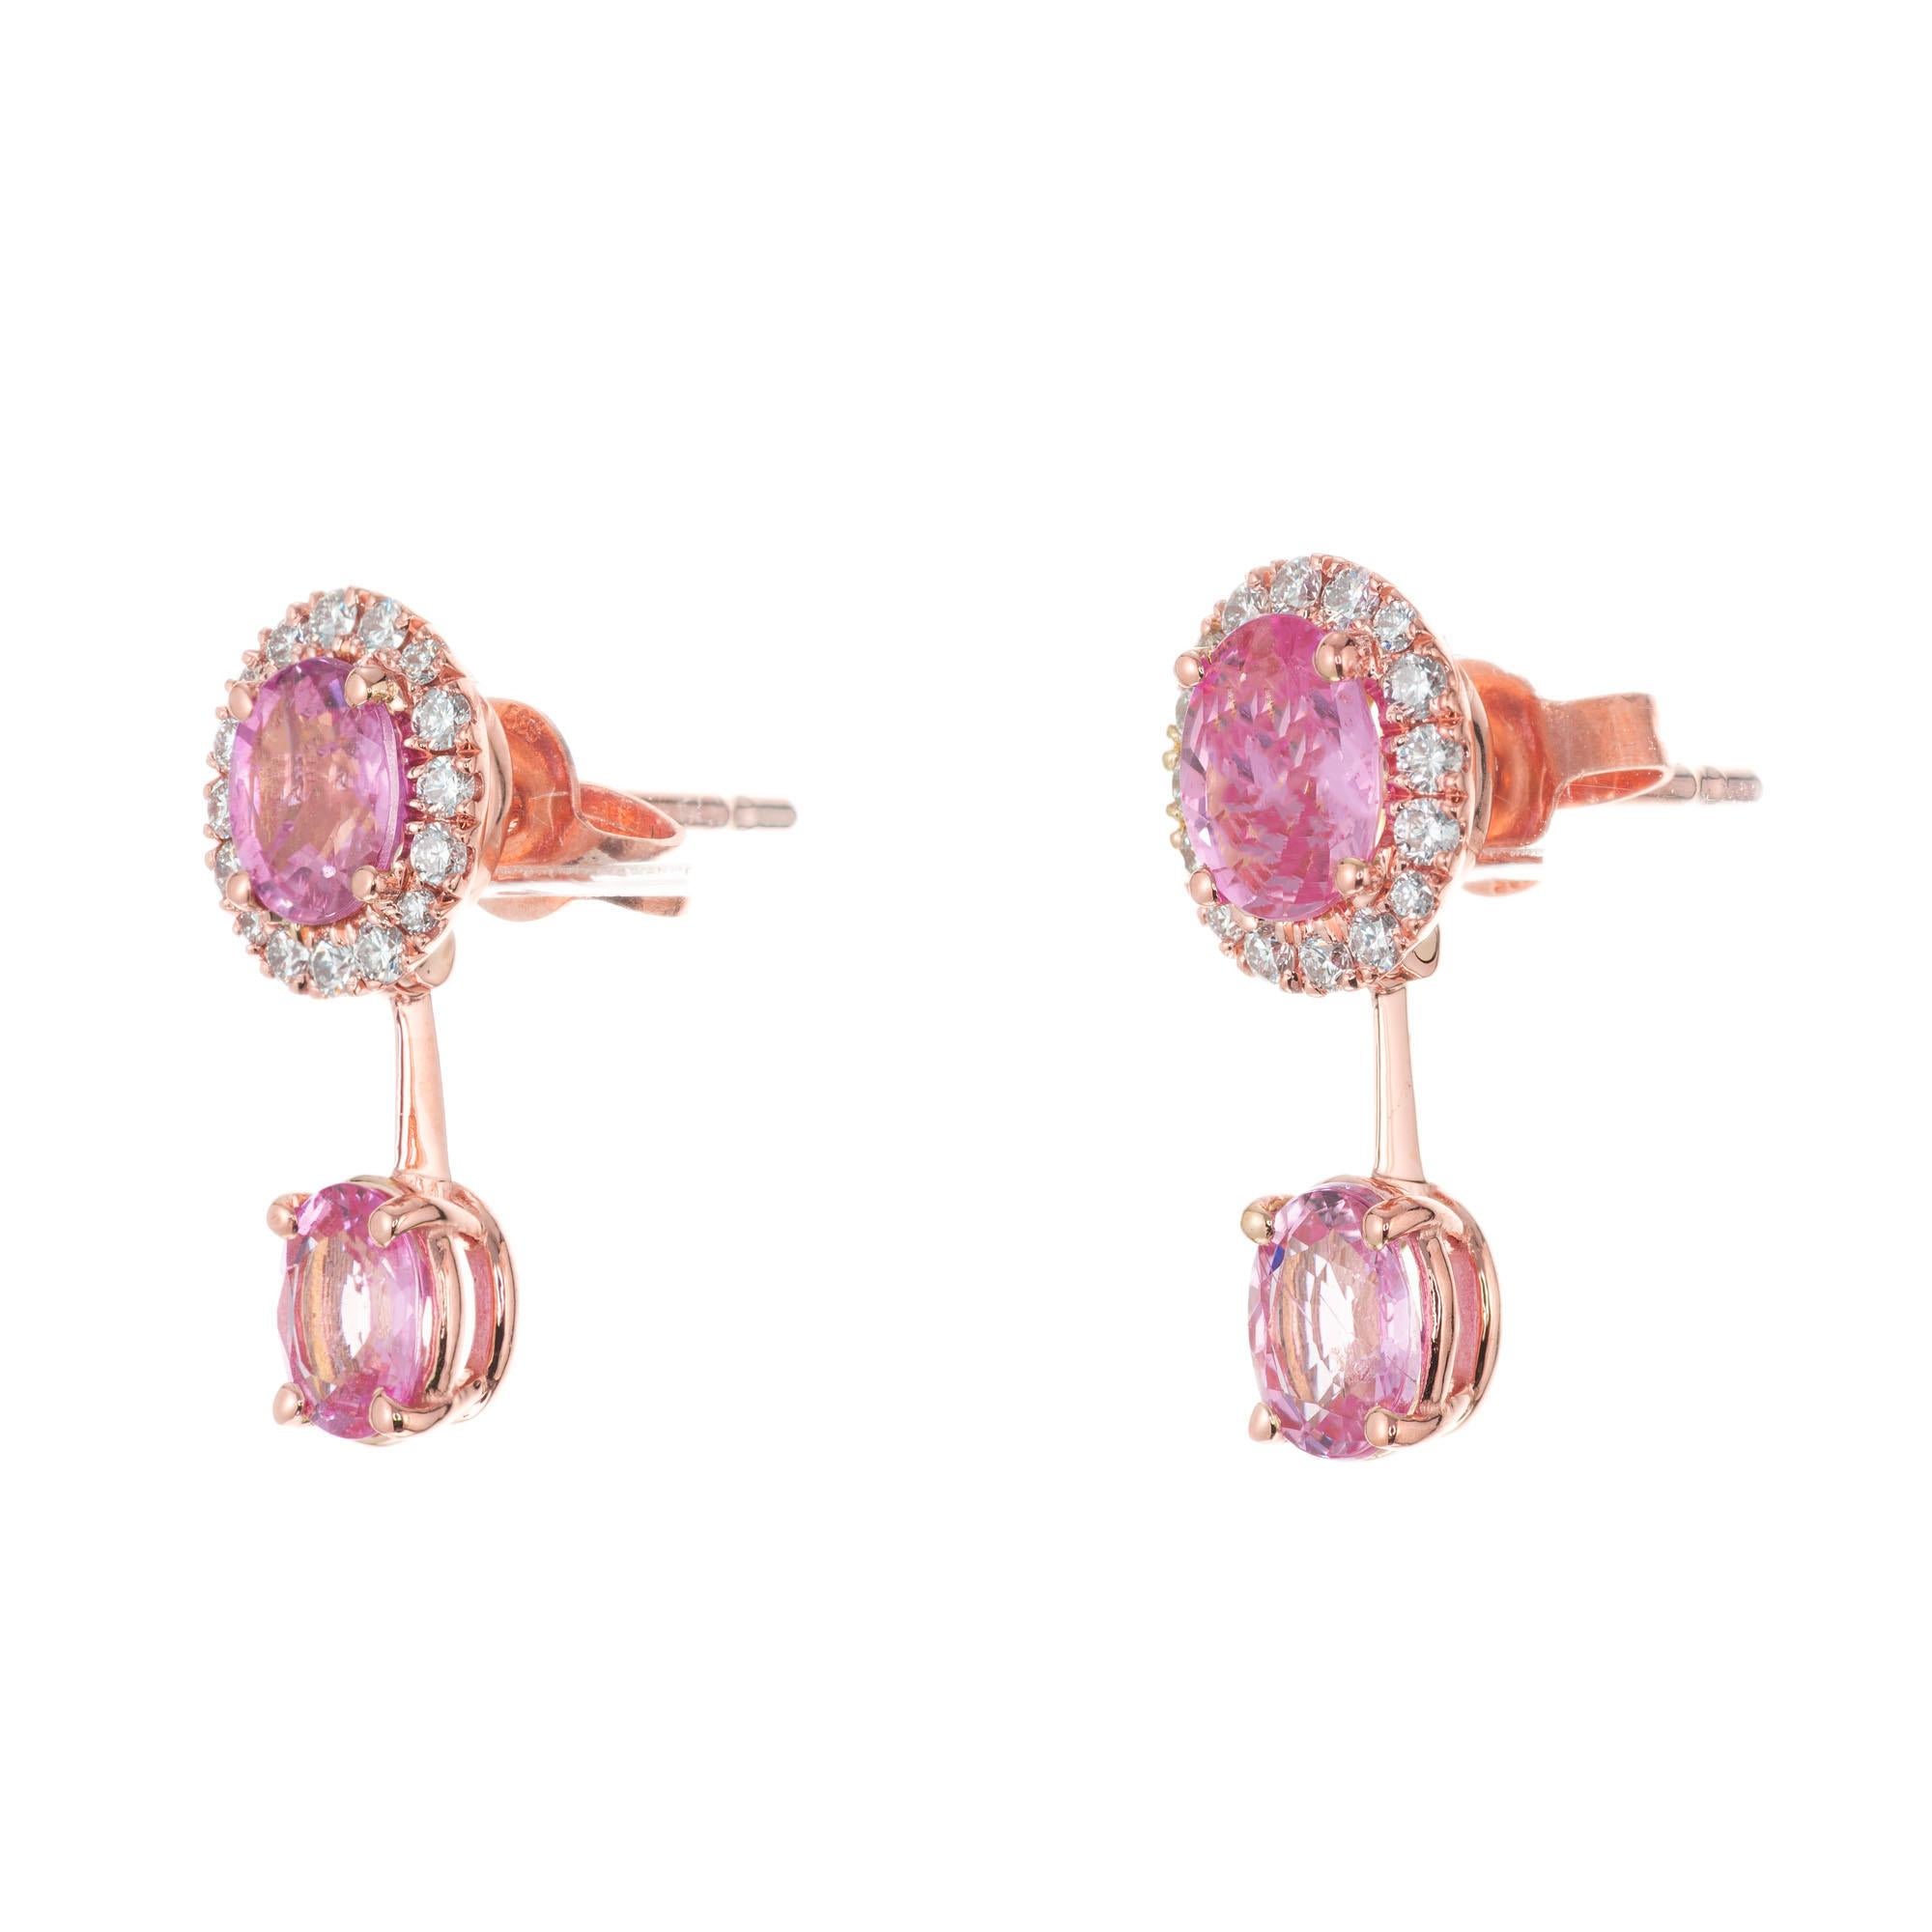 Sapphire and diamond drop dangle earrings. 4 oval pink sapphires with 32 round brilliant cut diamond halos in 14k rose gold. Designed and crafted in the Peter Suchy Workshop.  

4 oval pink sapphires, approx. 1.80cts
32 round brilliant cut diamonds,